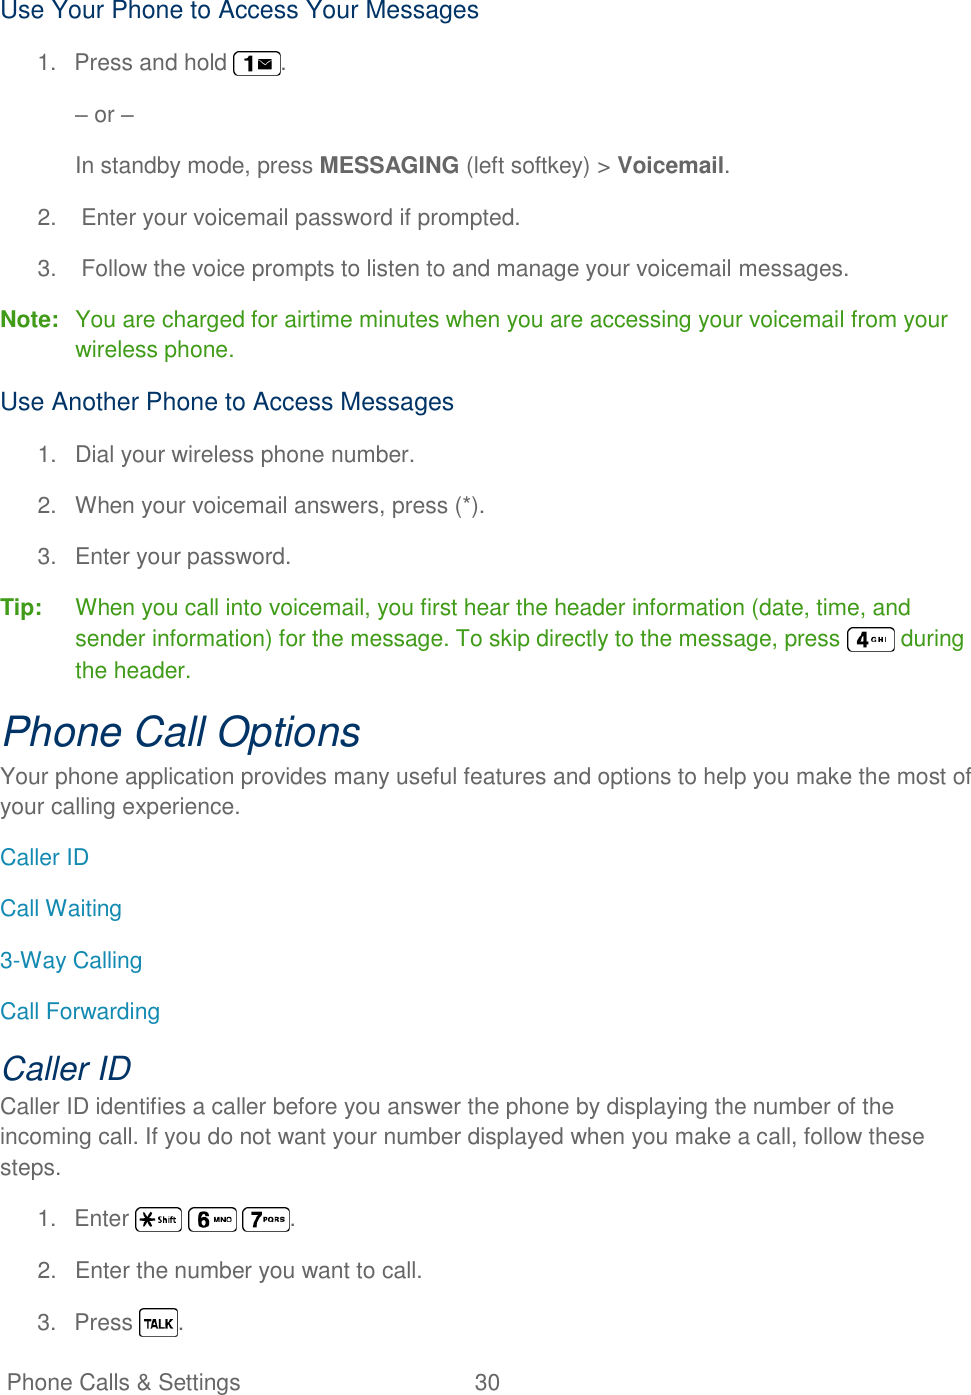   Phone Calls &amp; Settings  30   Use Your Phone to Access Your Messages 1.  Press and hold  . – or – In standby mode, press MESSAGING (left softkey) &gt; Voicemail. 2.  Enter your voicemail password if prompted. 3.  Follow the voice prompts to listen to and manage your voicemail messages. Note:  You are charged for airtime minutes when you are accessing your voicemail from your wireless phone. Use Another Phone to Access Messages 1.  Dial your wireless phone number. 2.  When your voicemail answers, press (*). 3.  Enter your password. Tip:  When you call into voicemail, you first hear the header information (date, time, and sender information) for the message. To skip directly to the message, press   during the header. Phone Call Options Your phone application provides many useful features and options to help you make the most of your calling experience. Caller ID Call Waiting 3-Way Calling Call Forwarding Caller ID Caller ID identifies a caller before you answer the phone by displaying the number of the incoming call. If you do not want your number displayed when you make a call, follow these steps. 1.  Enter      . 2.  Enter the number you want to call. 3.  Press  . 